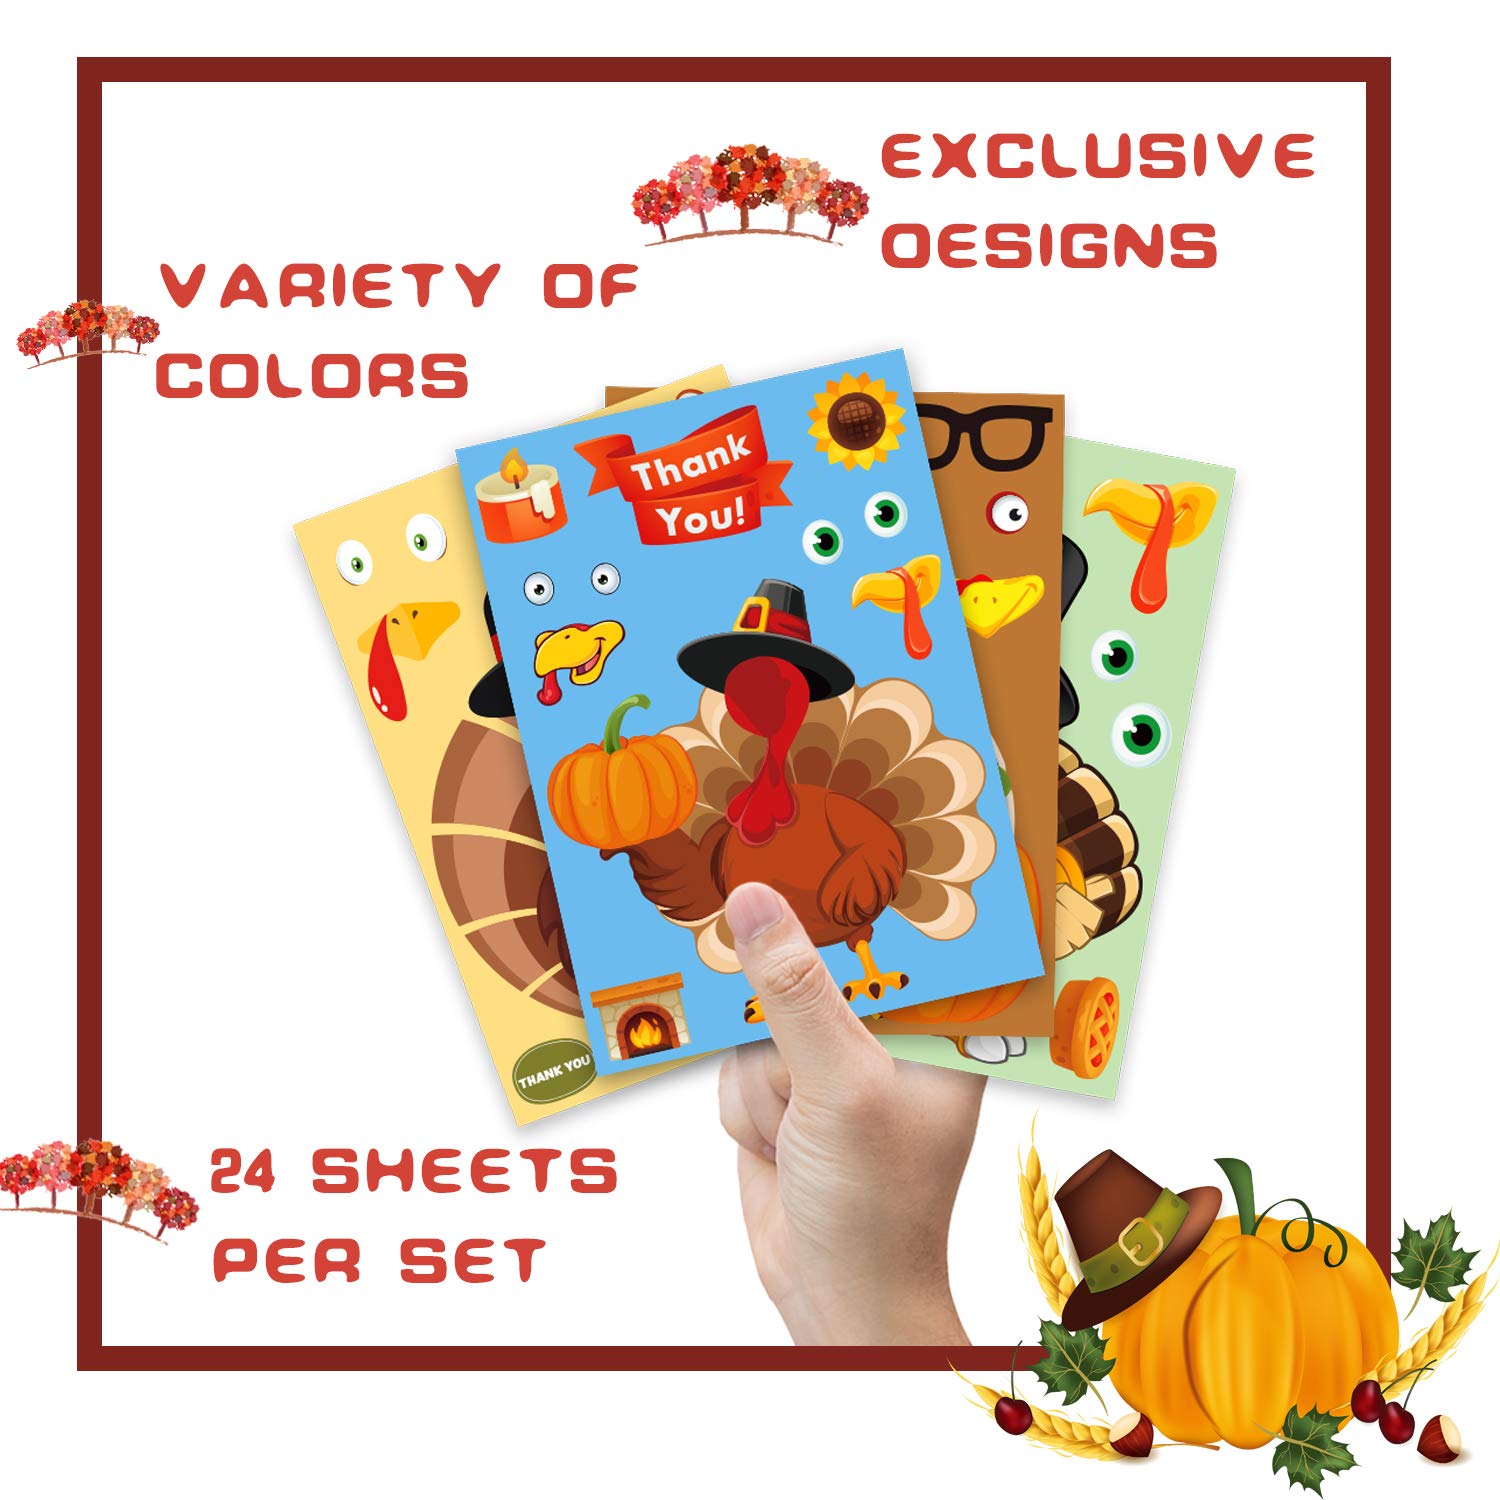 Funnlot Thanksgiving Party Games for Kids,24PCS Thanksgiving Activities for Toddlers Make A Turkey Stickers Thanksgiving Games Supplies Decorations Turkey Stickers